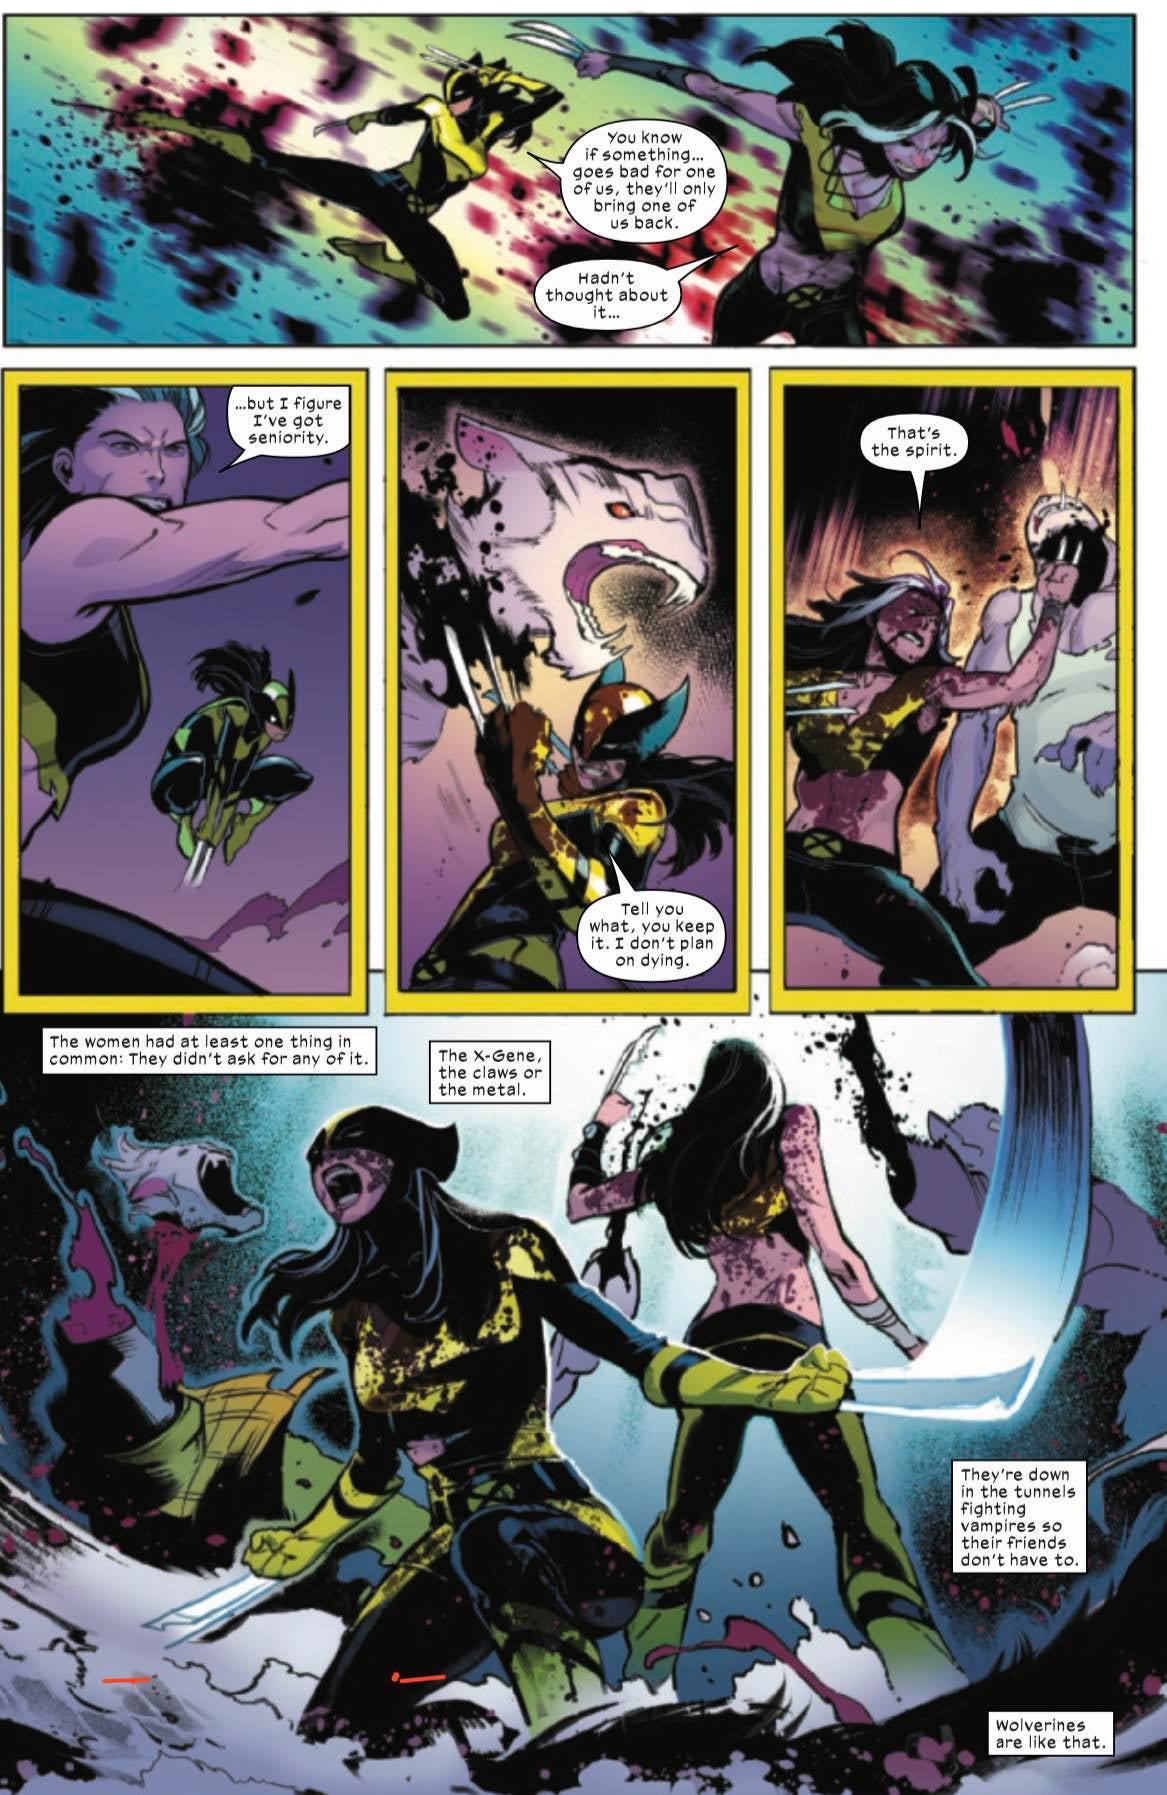 Wolverine and her clone fight side by side (X-Men #18)